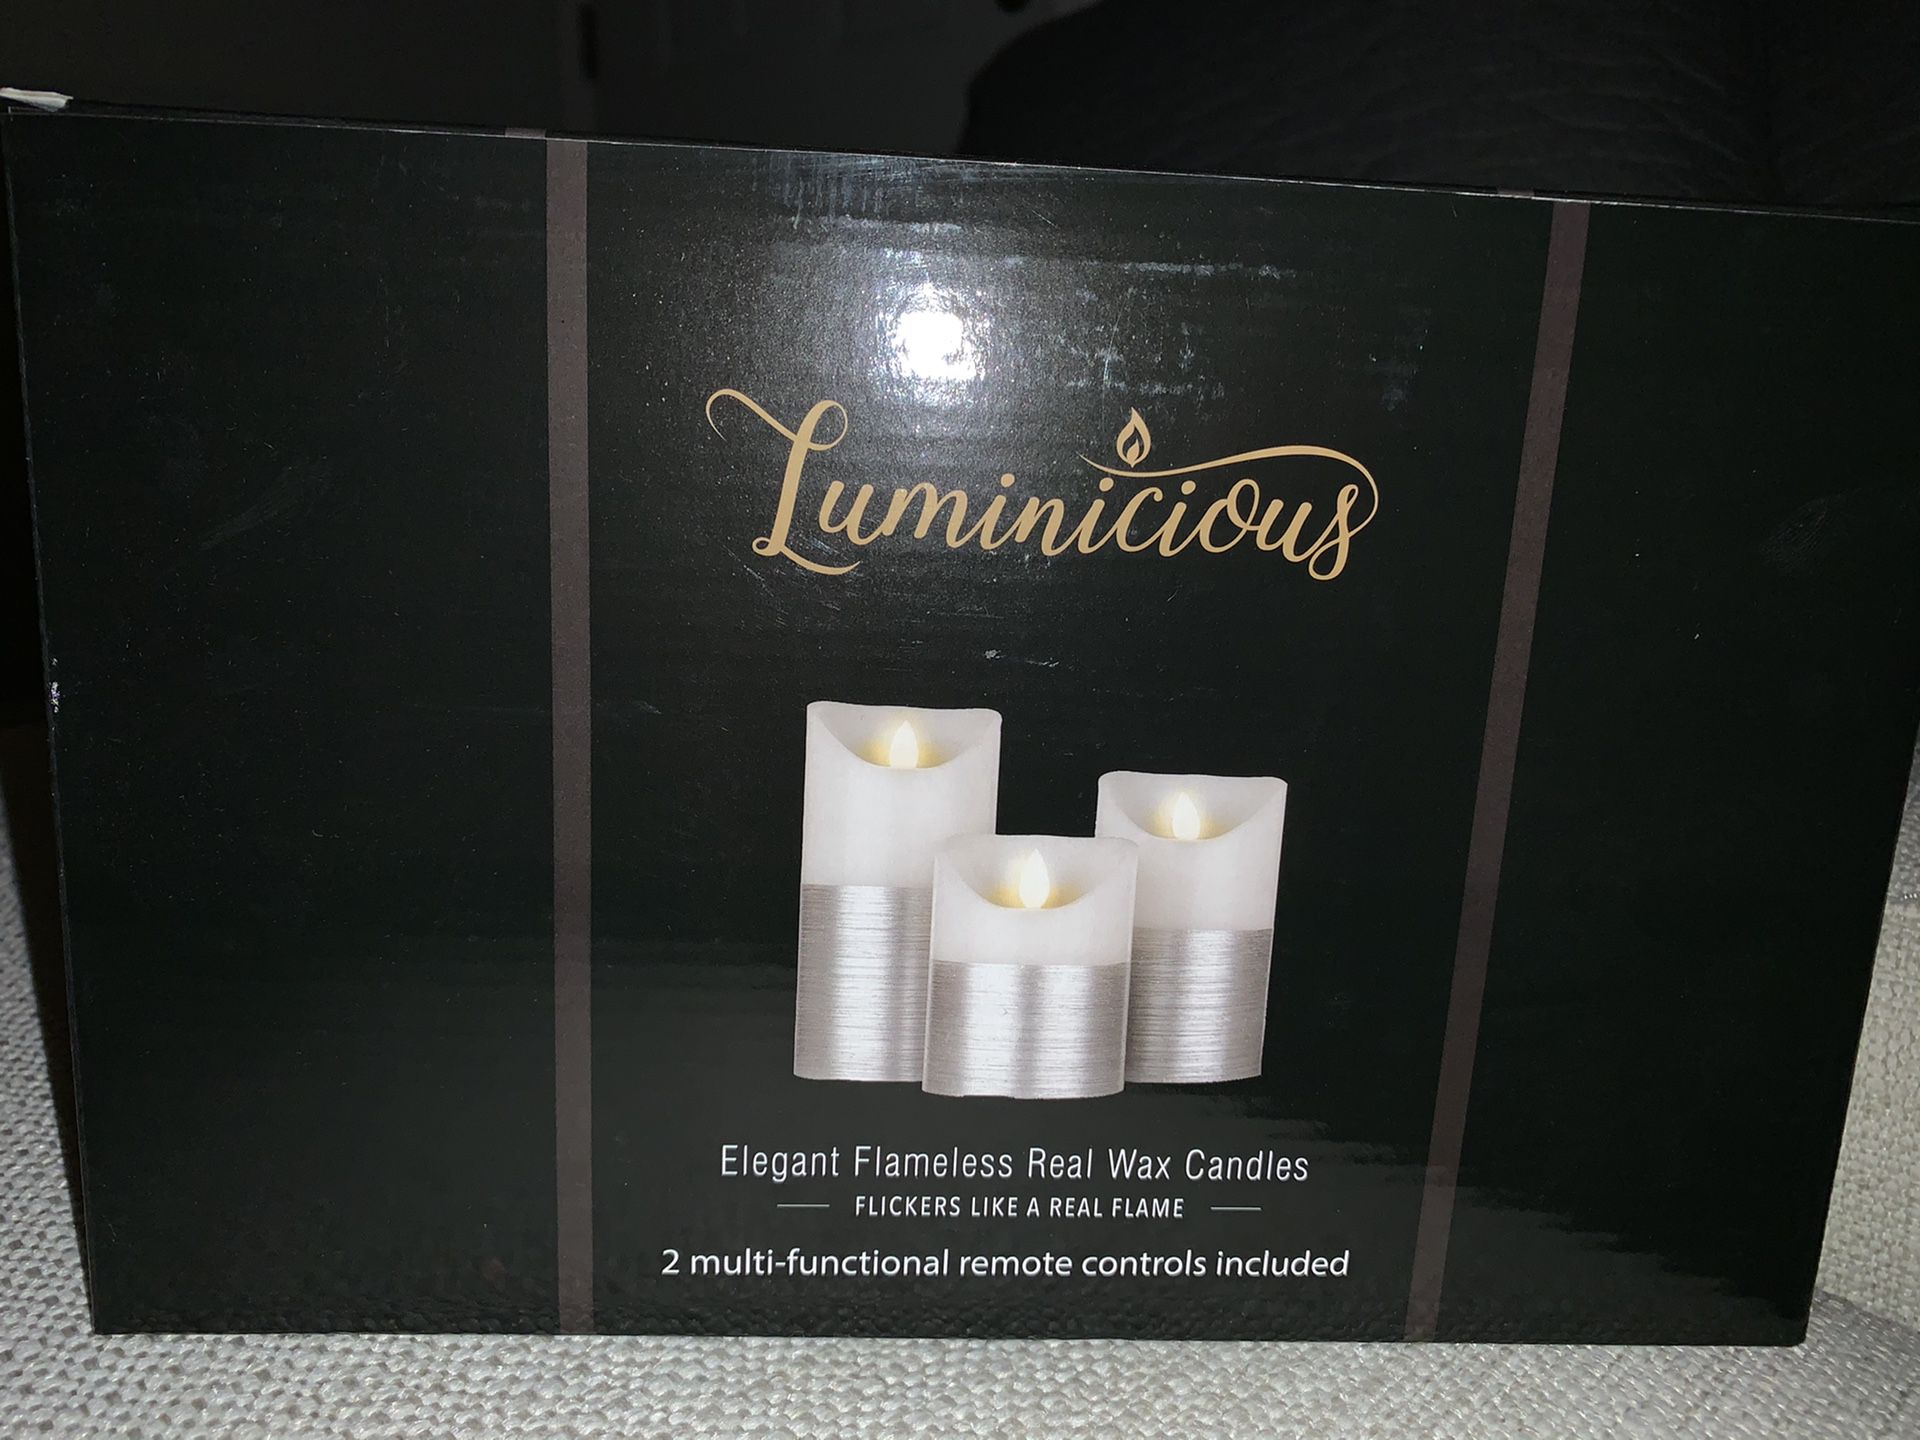 Luminicious flameless candles with remote controls